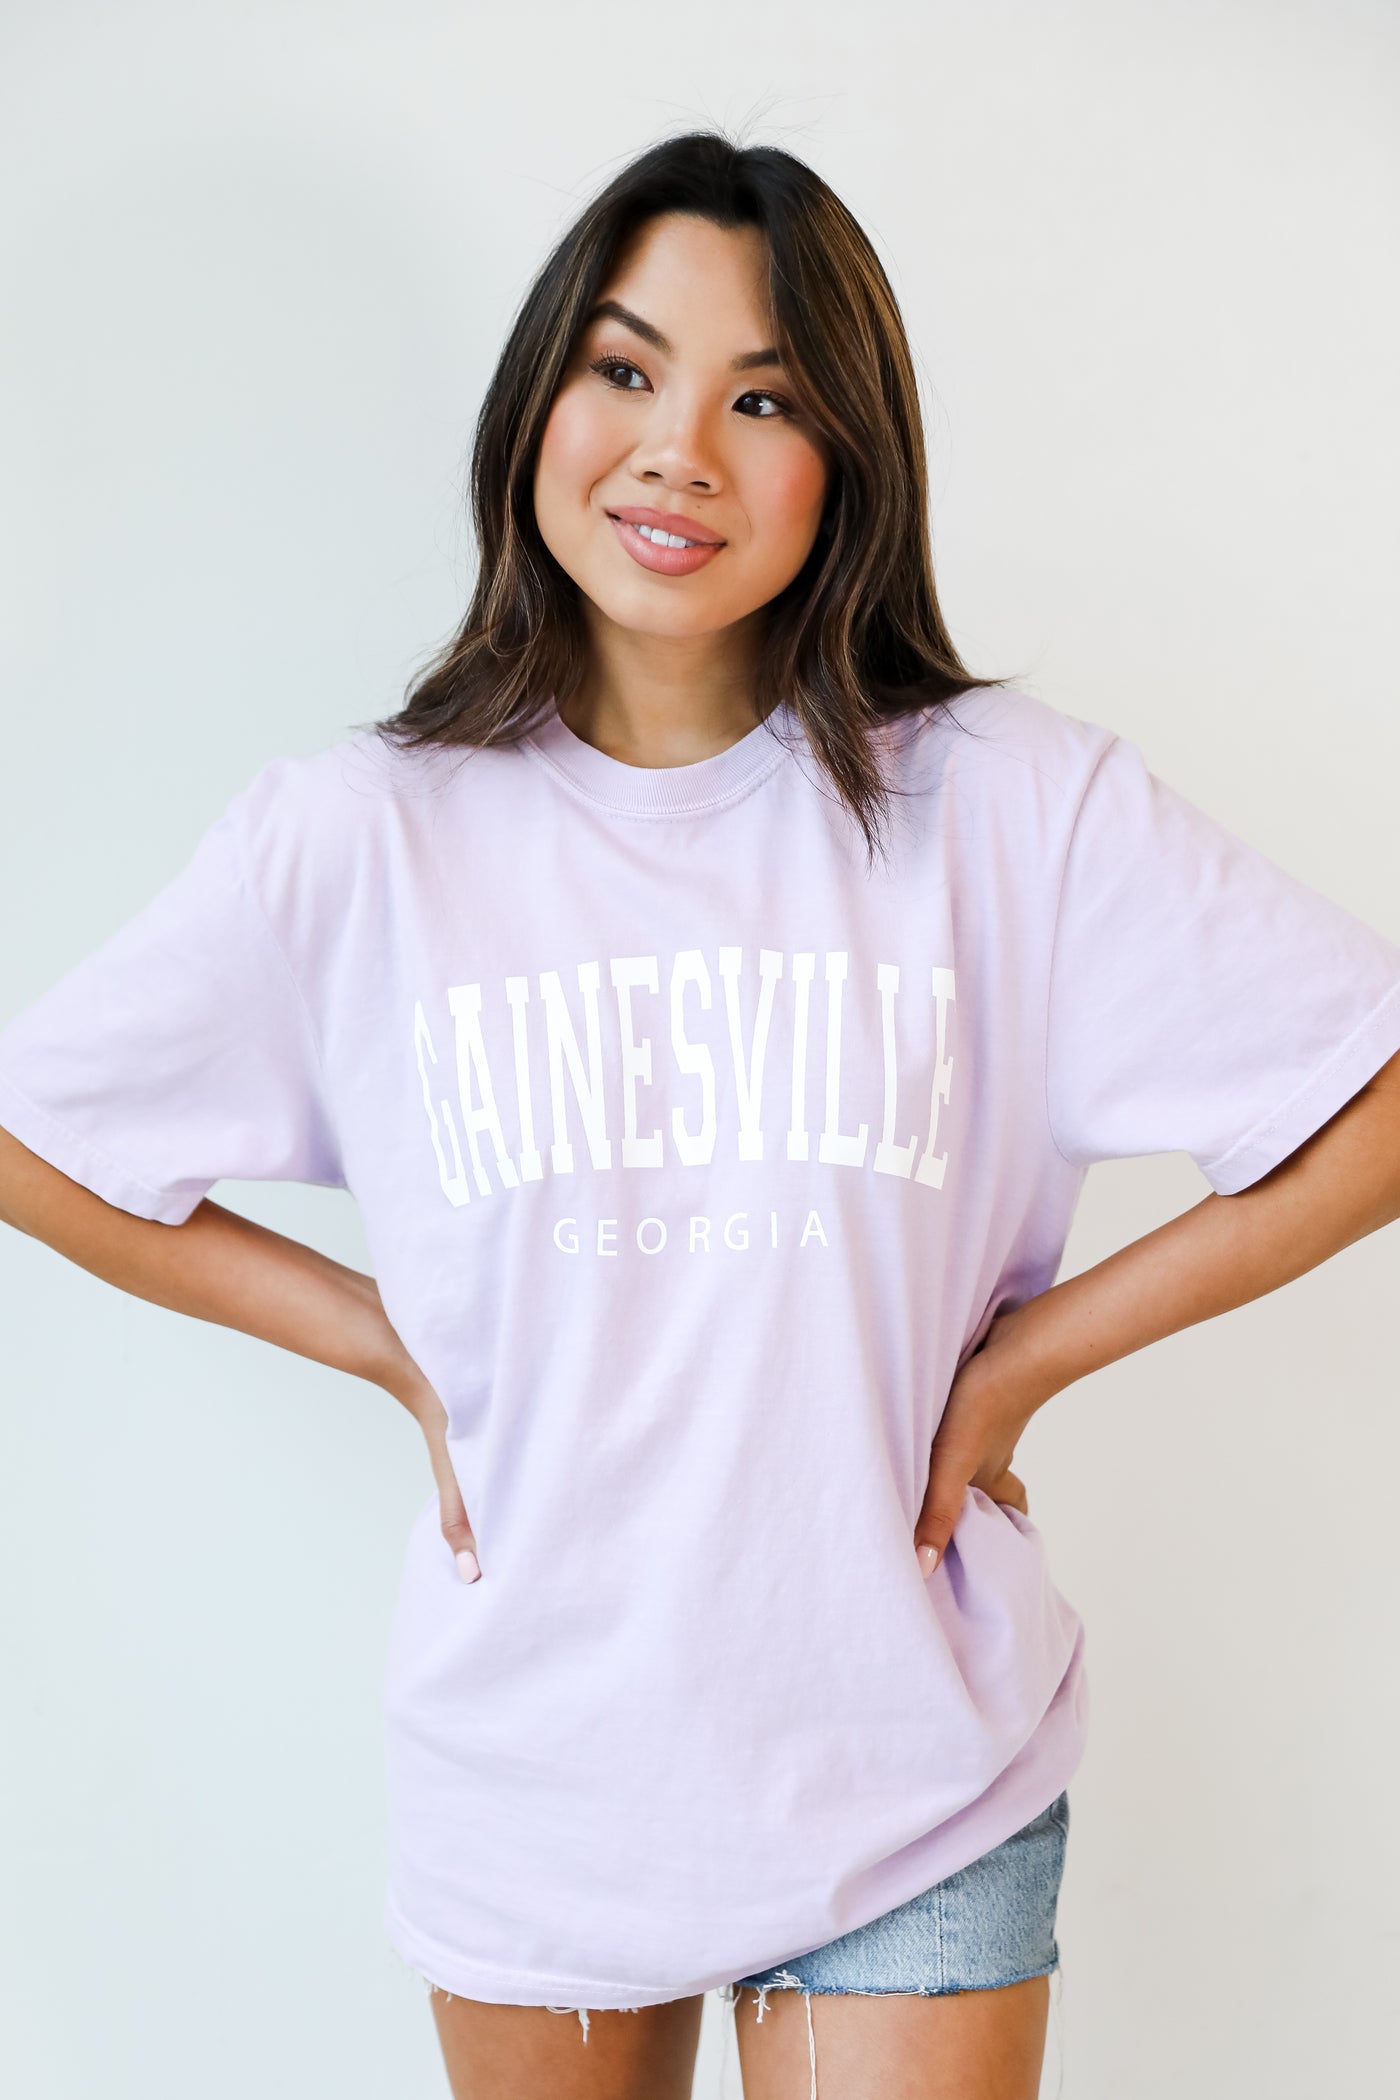 Lavender Gainesville Georgia Tee front view